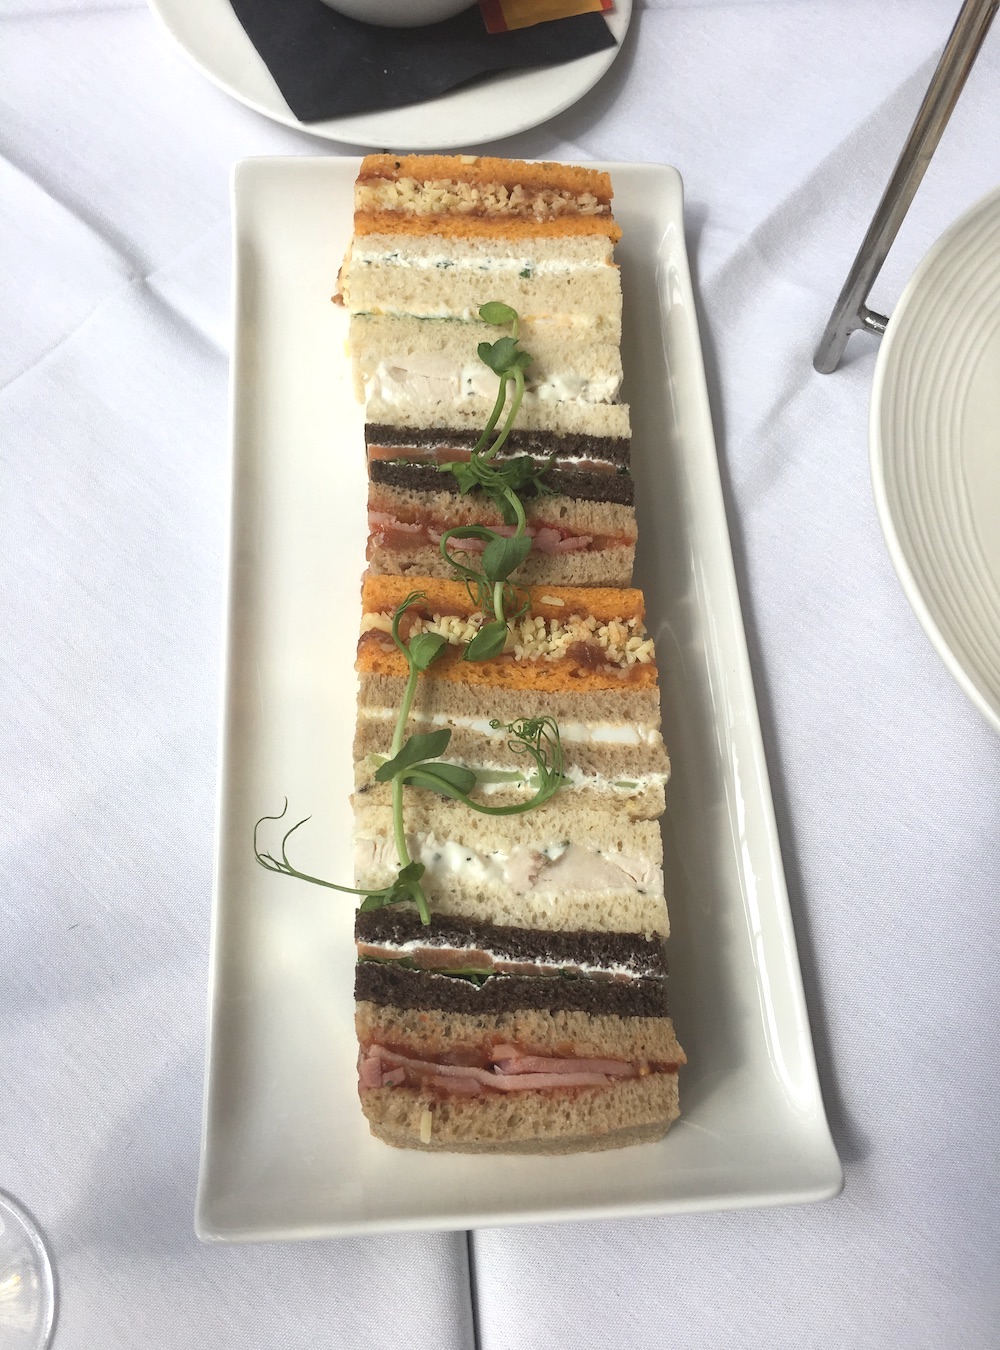 afternoon tea sandwiches at the mere knutsford 2019